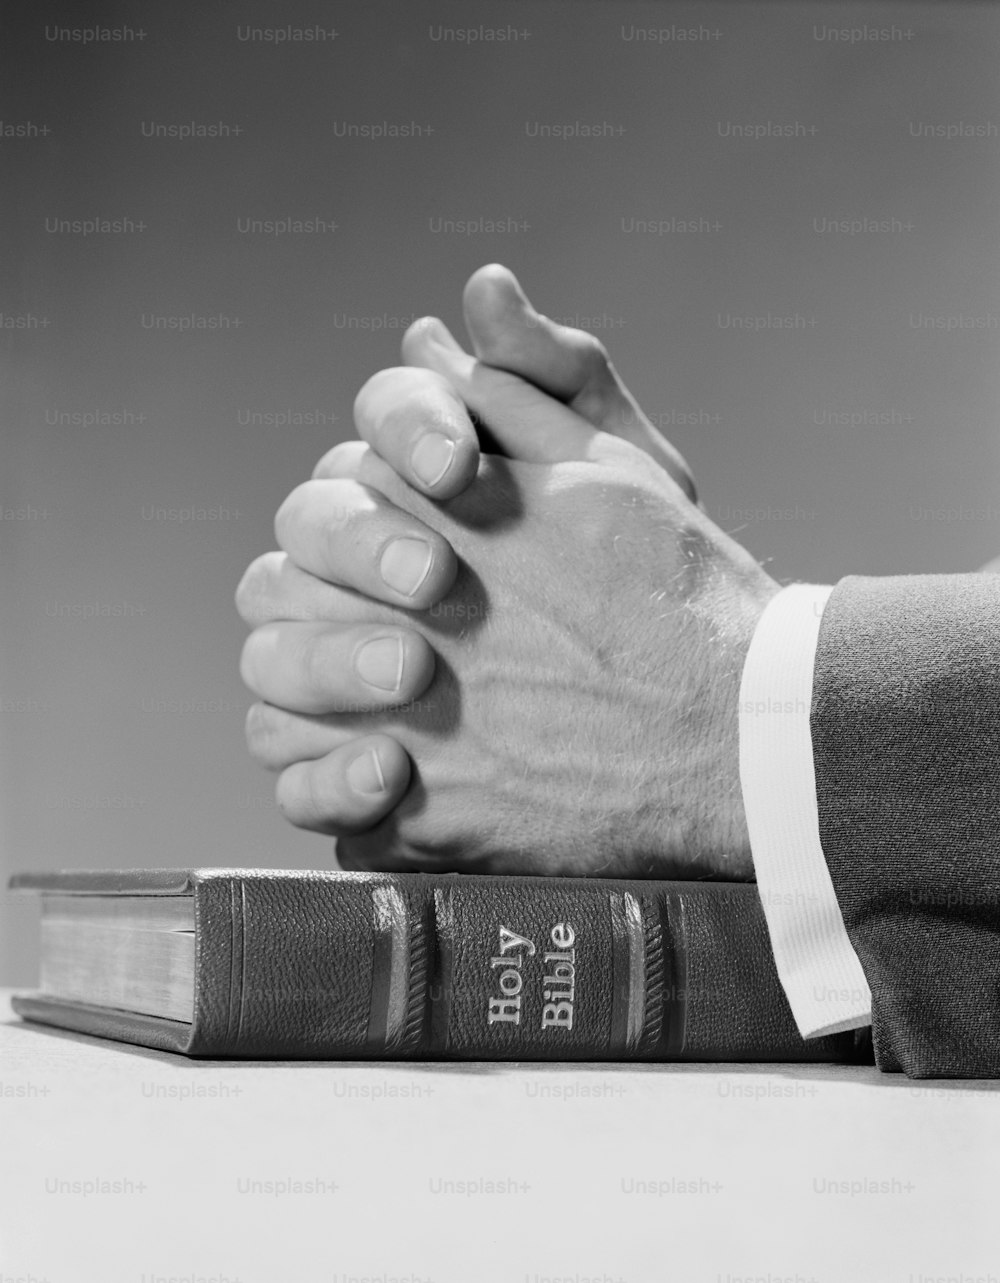 UNITED STATES - CIRCA 1960s:  Man's hands resting on top of holy bible, in prayer.